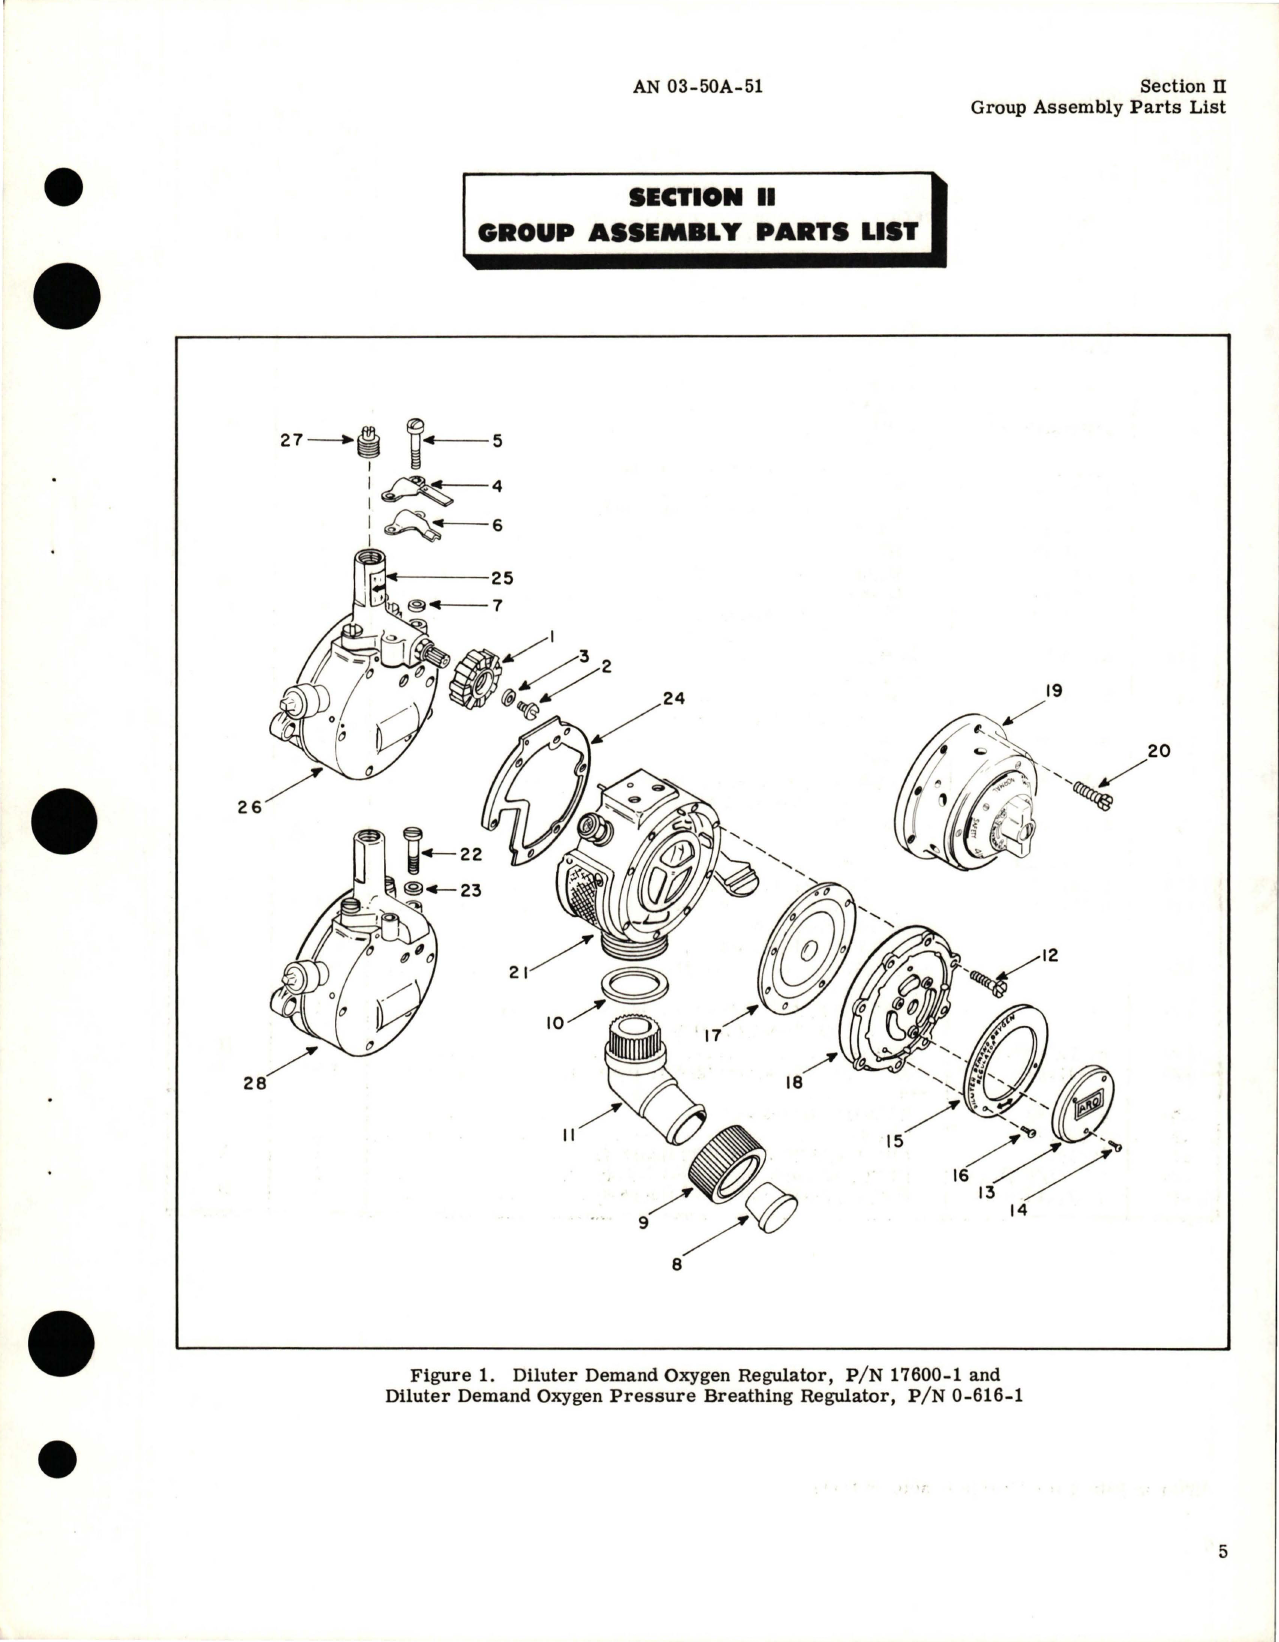 Sample page 7 from AirCorps Library document: Illustrated Parts Breakdown for Diluter Demand Oxygen & Pressure Breathing Regulator - Parts 17600-1 and 0-616-1